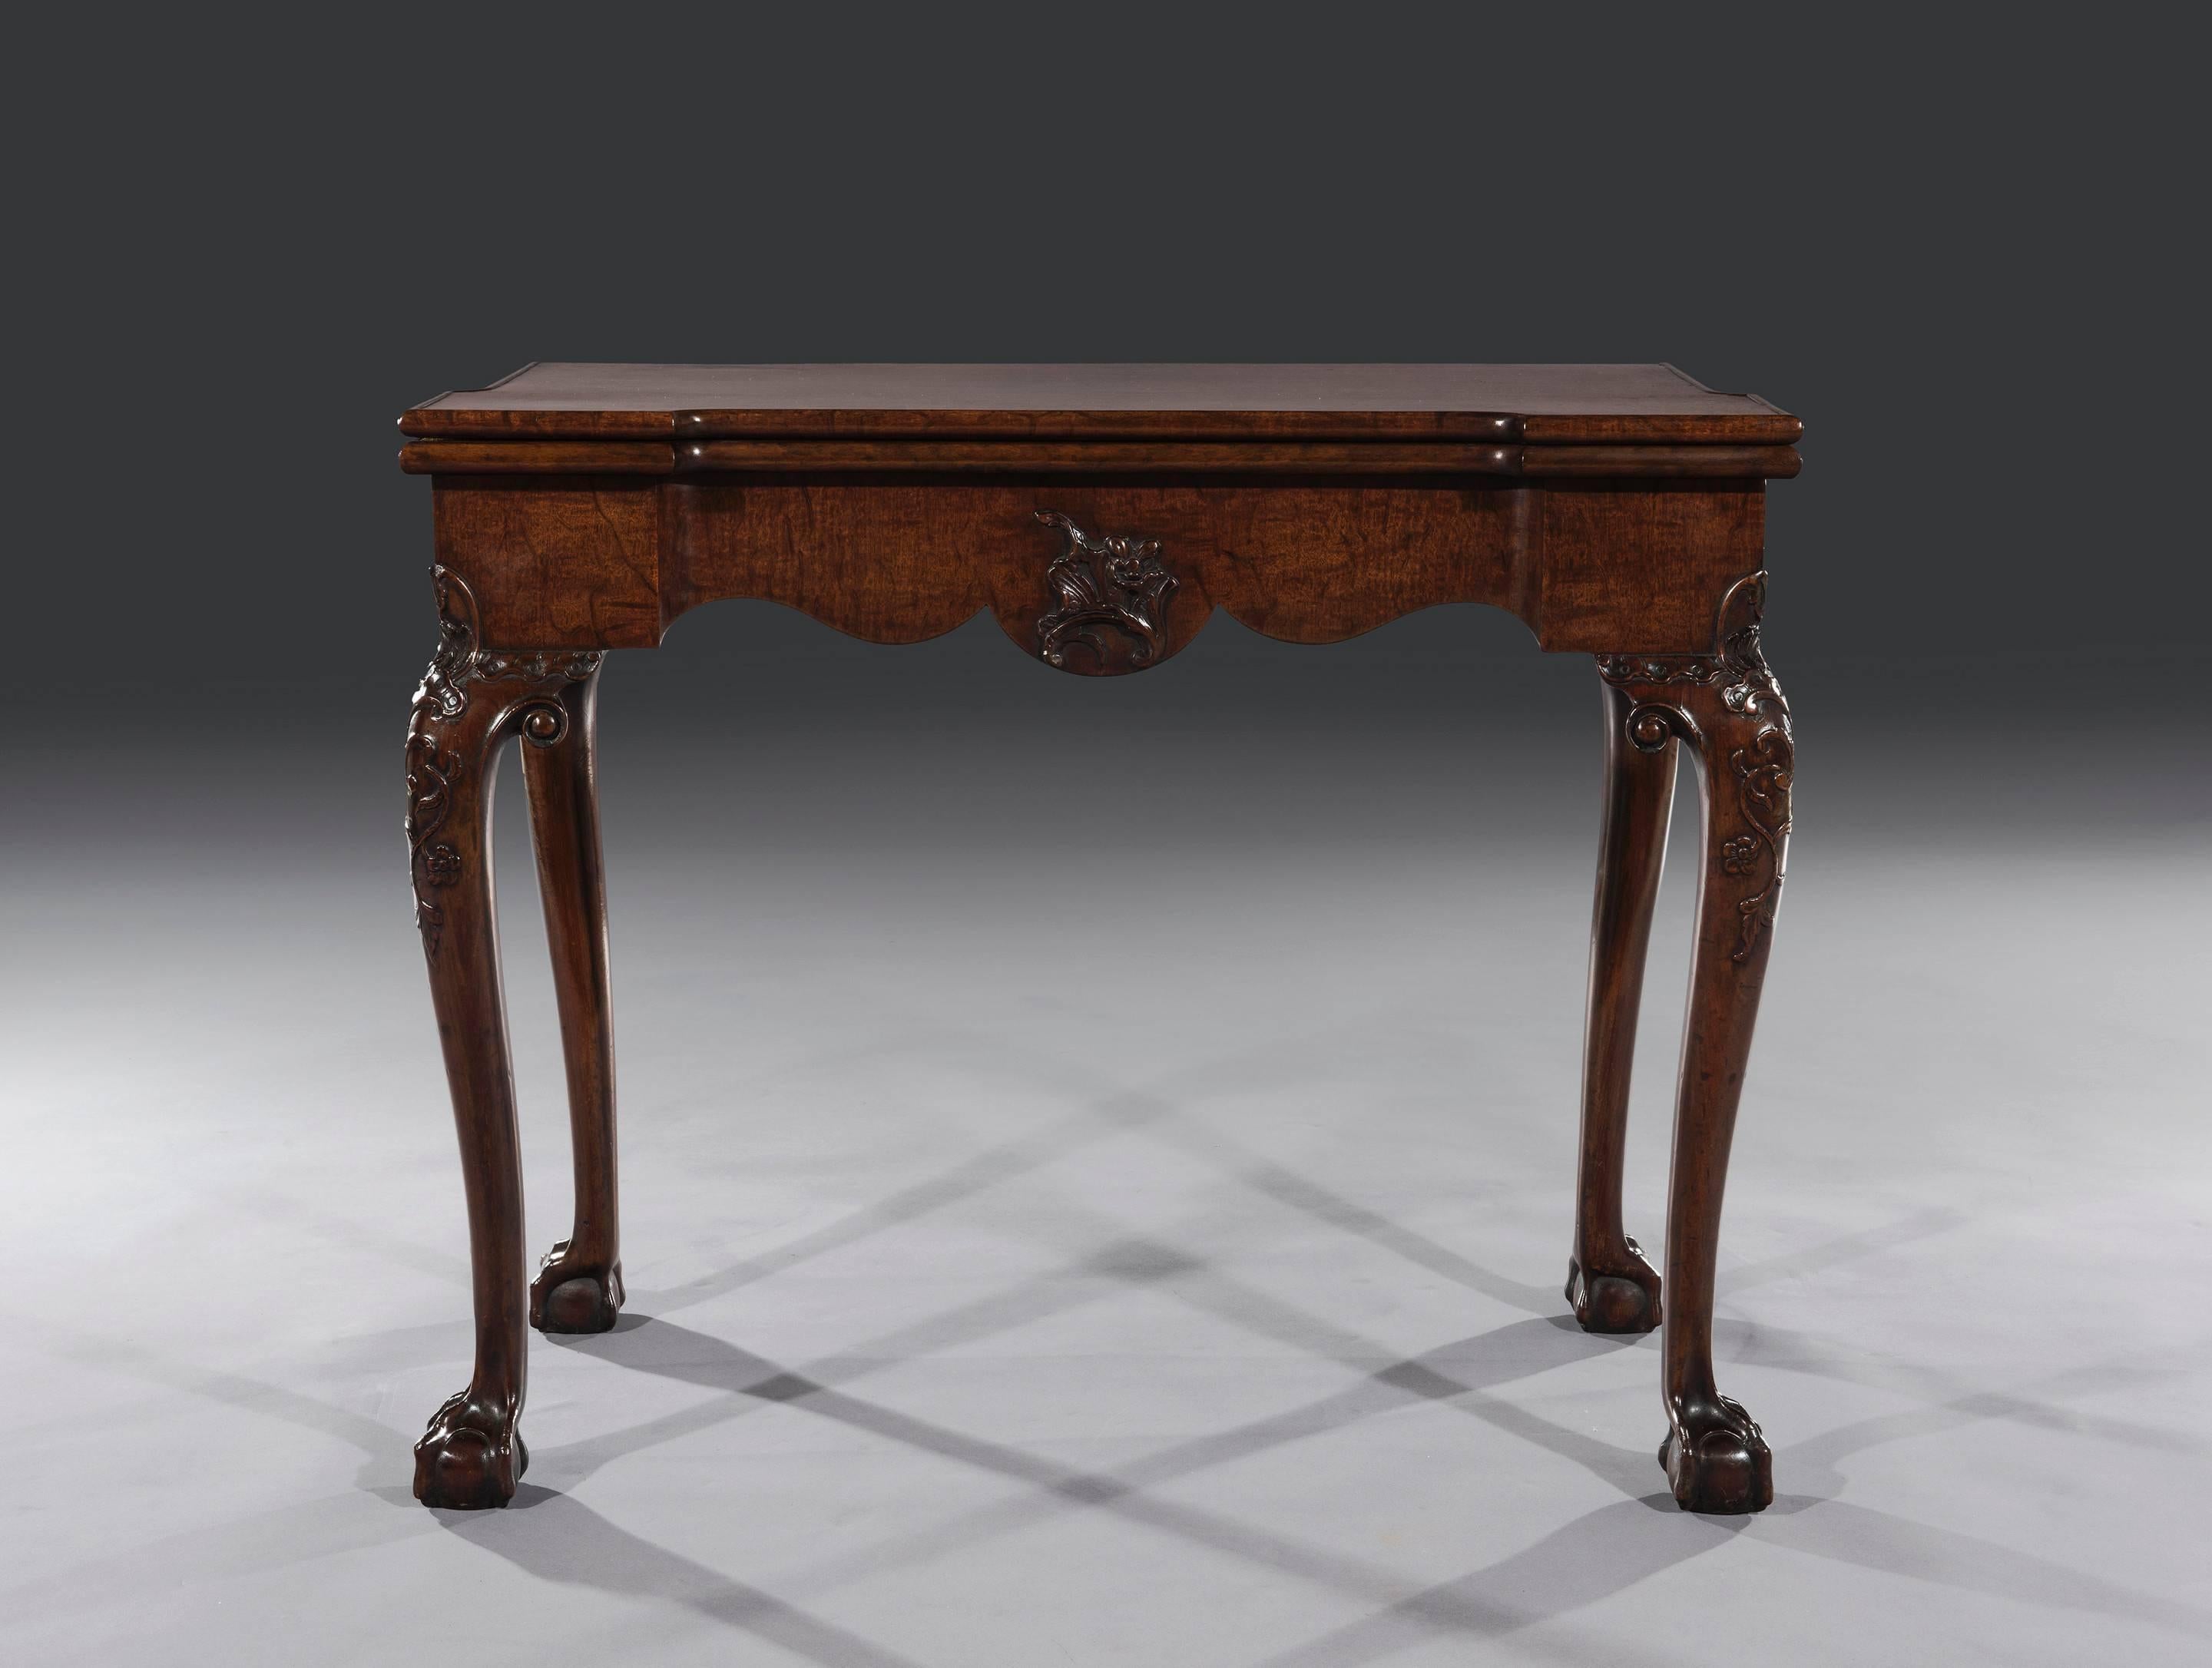 English Irish George III Carved Chippendale Period Mahogany and Amarillo Games Table